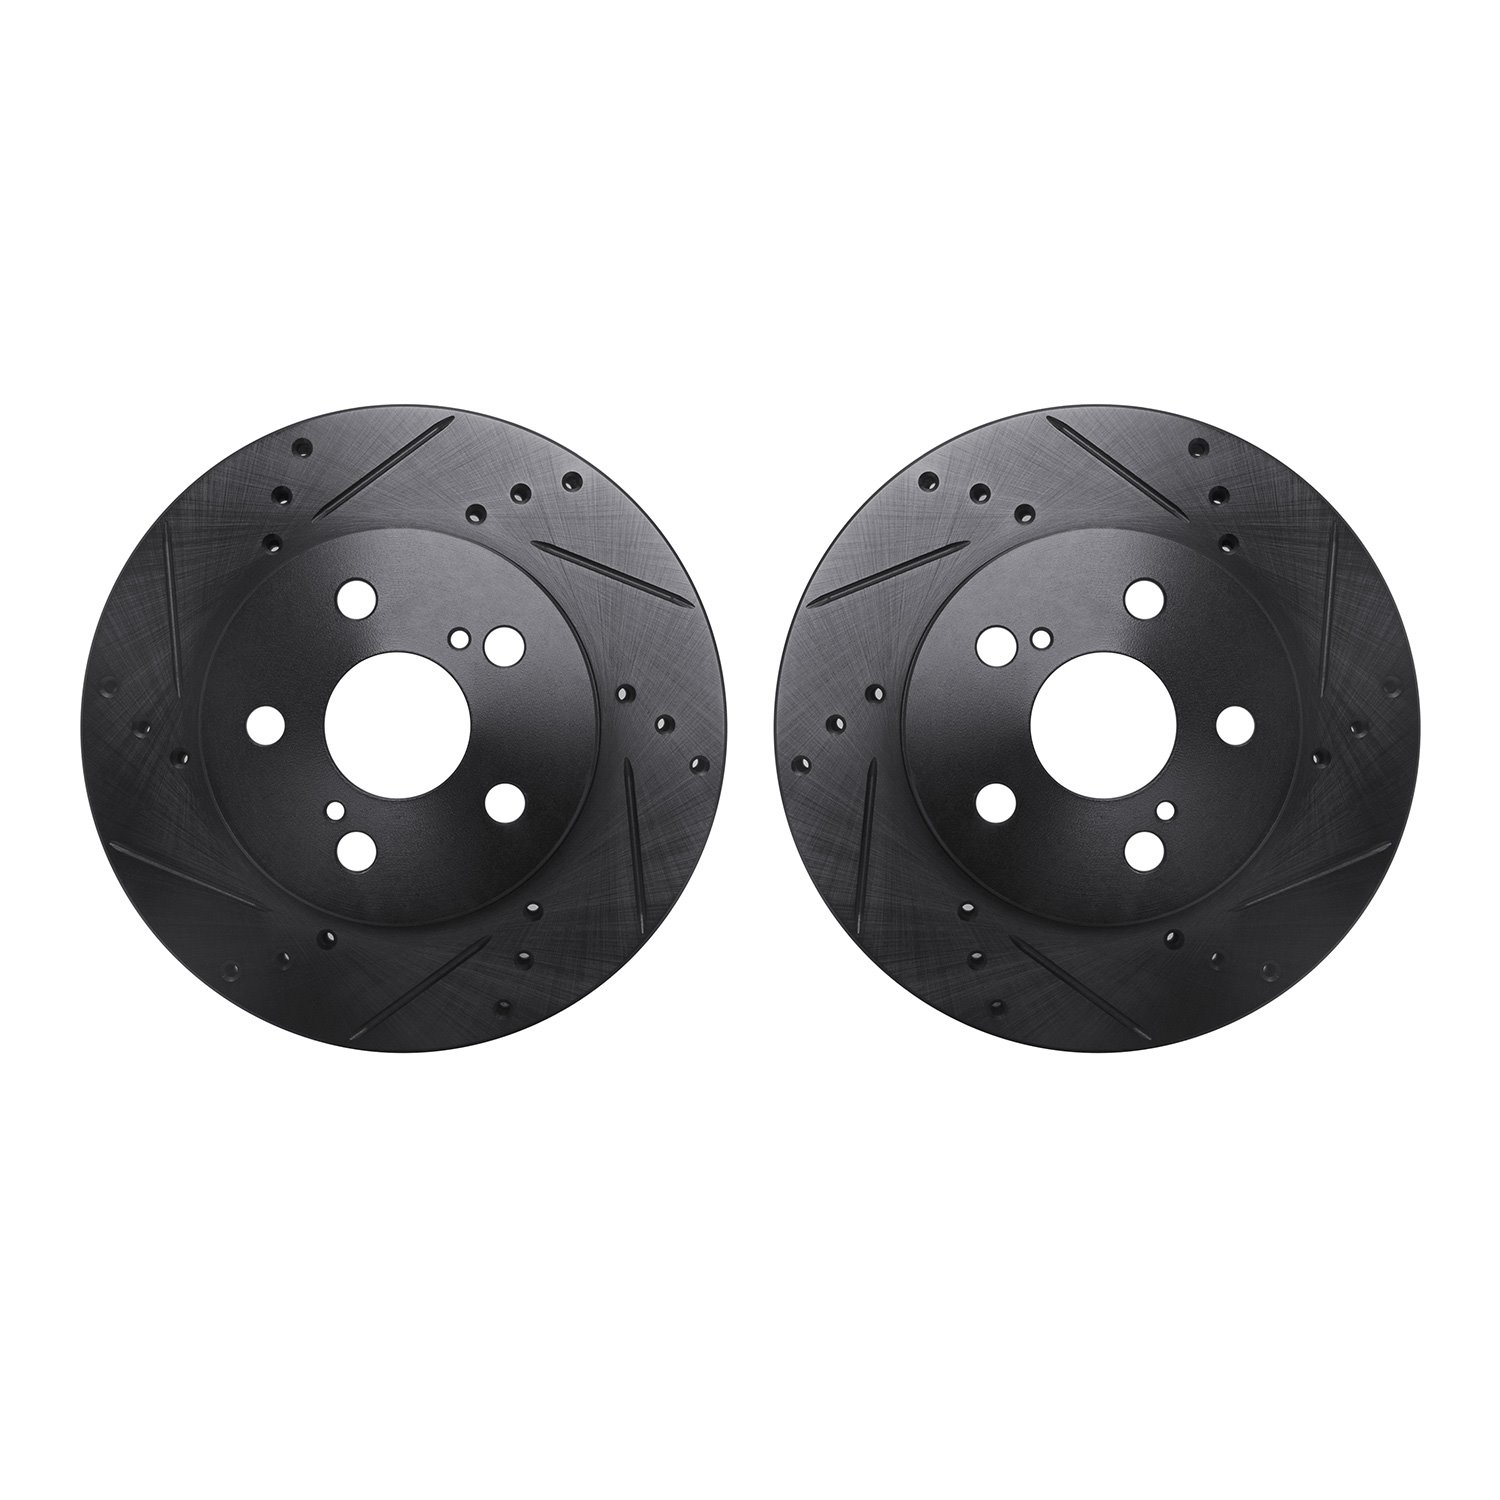 8002-76052 Drilled/Slotted Brake Rotors [Black], Fits Select Lexus/Toyota/Scion, Position: Front